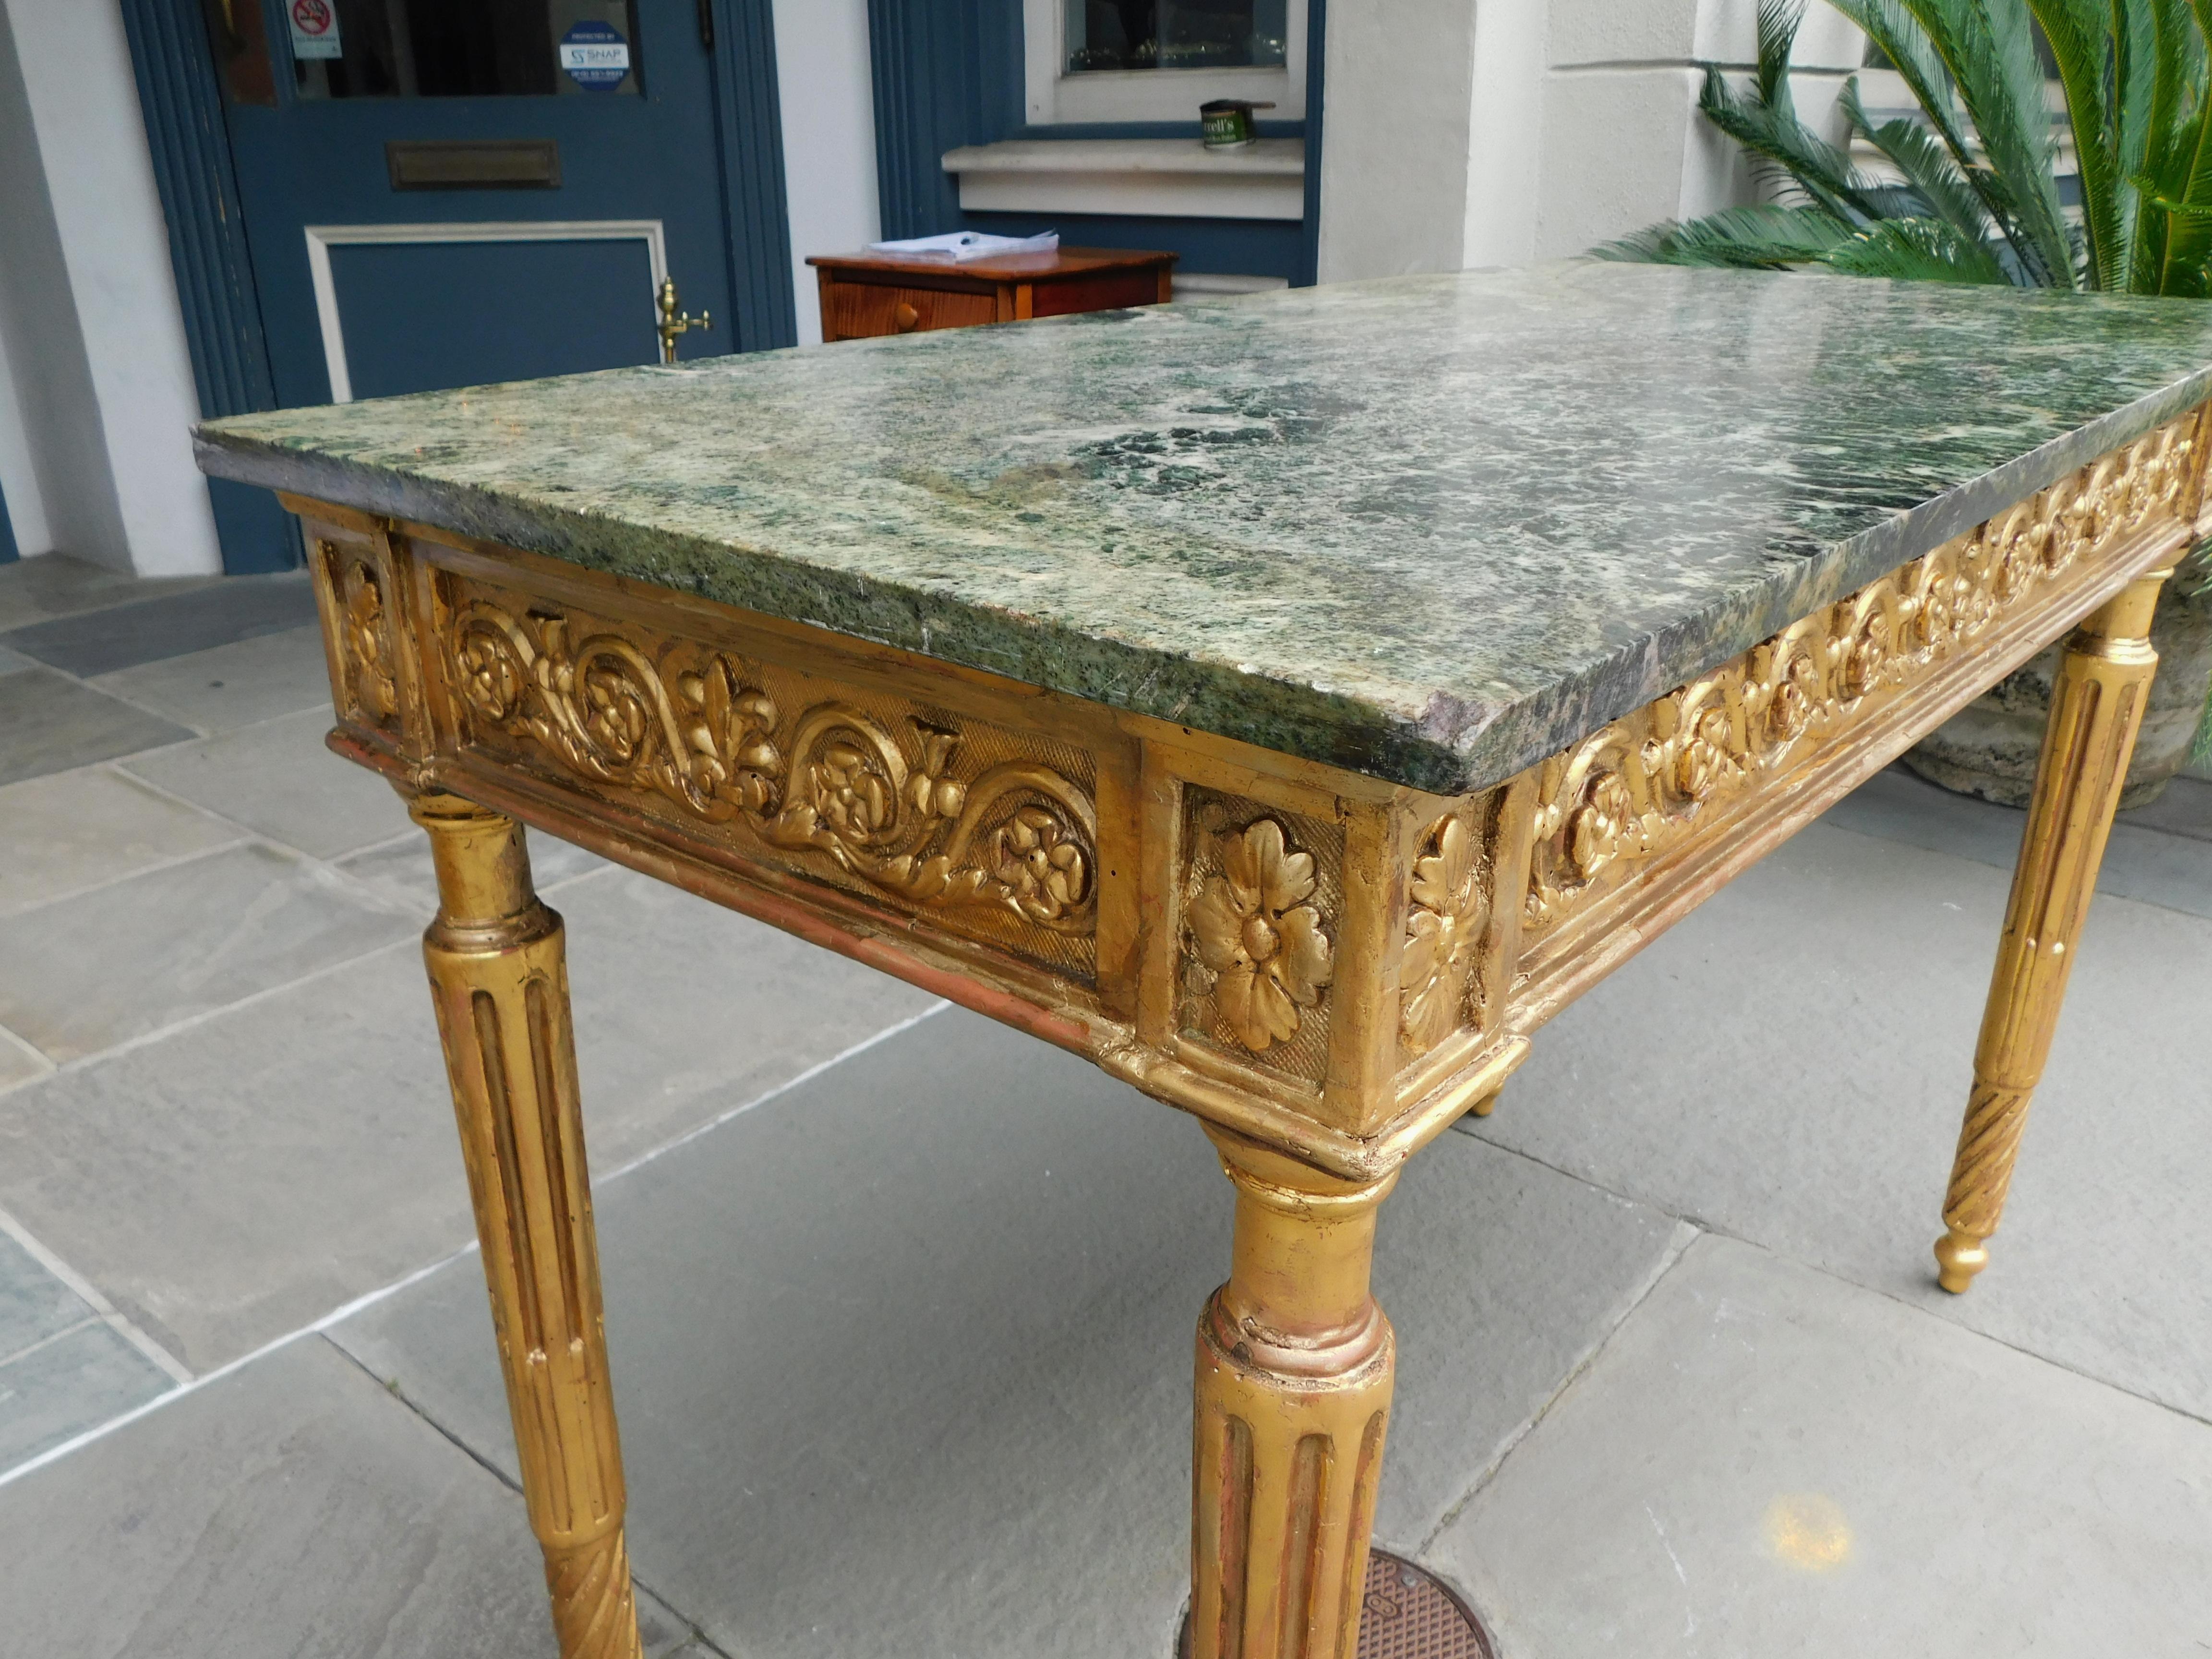 Italian Gilt Wood Marble Top Foliage Console Table with Fluted Legs, Circa 1770 For Sale 3